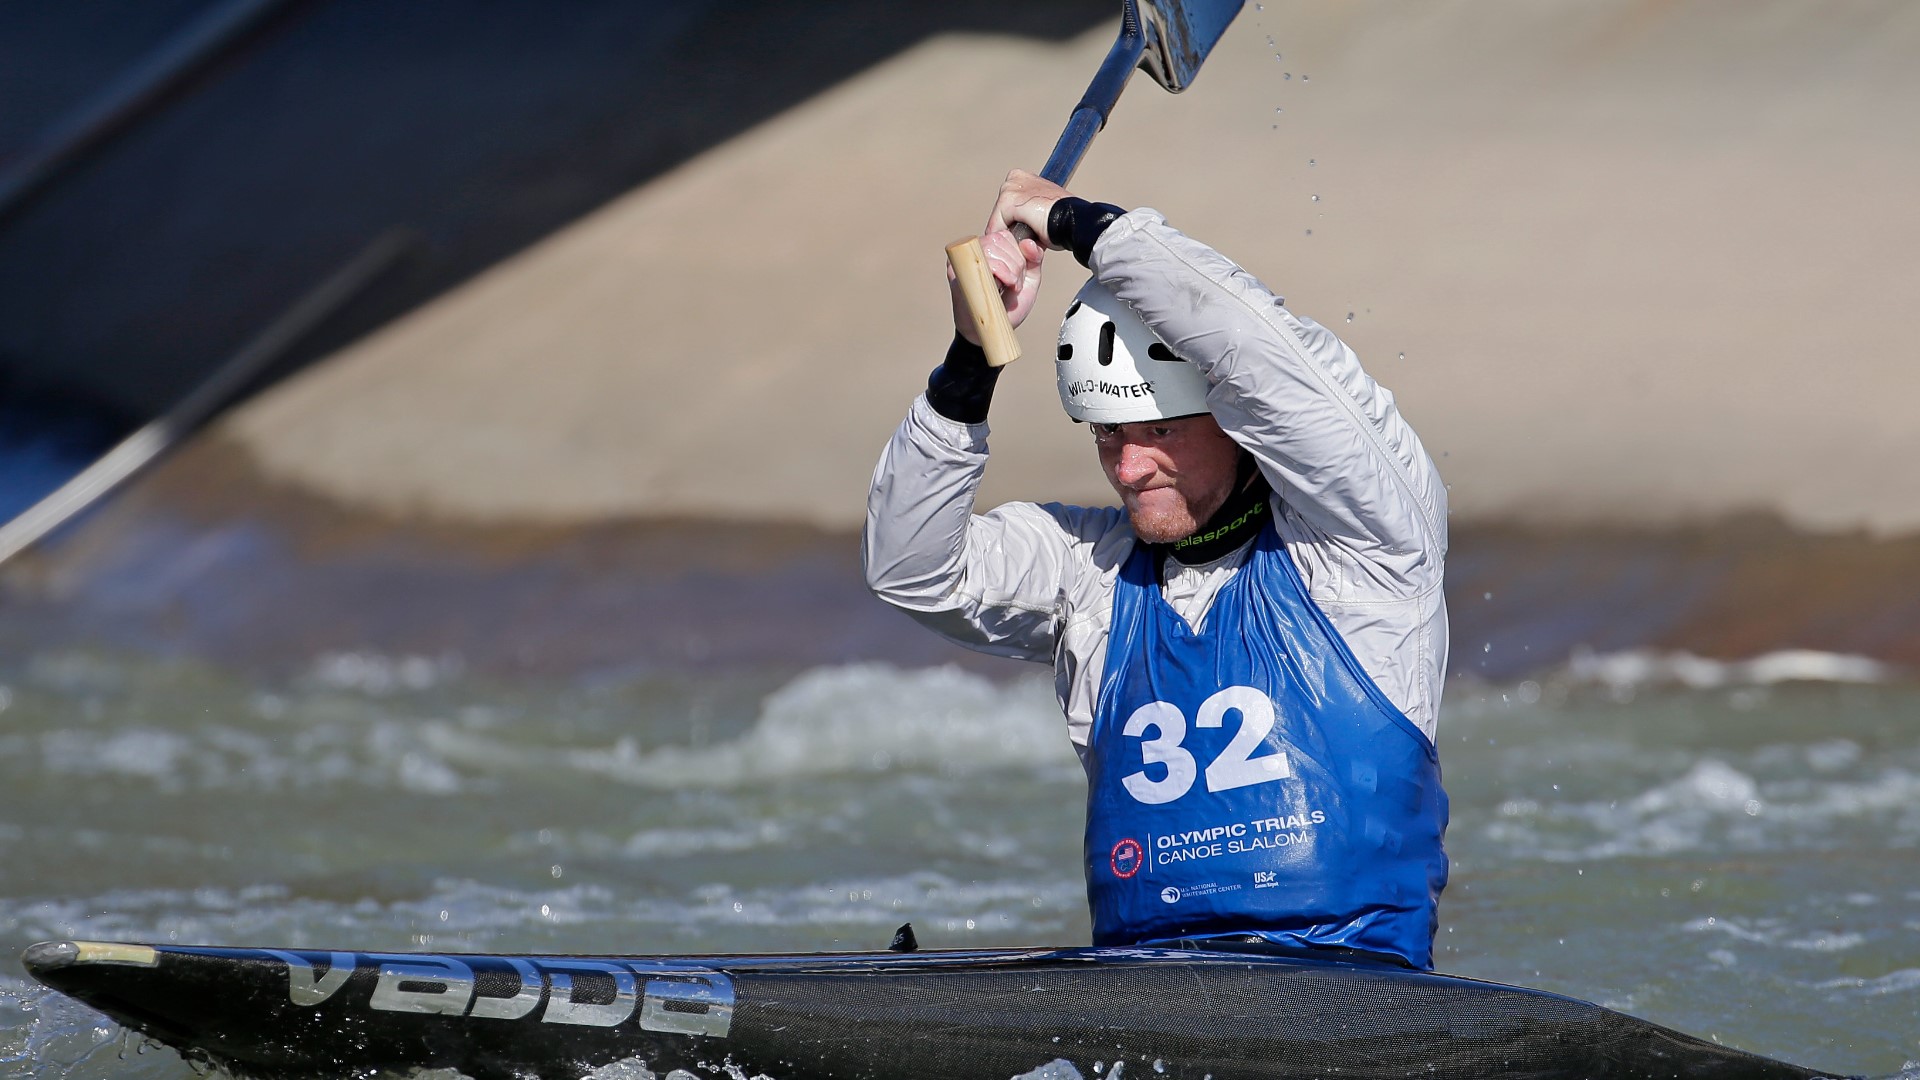 Zach Lokken, 27, is from Durango, Colorado, and will be representing Team USA in the Tokyo Olympics. Lokken will compete in American Canoe.